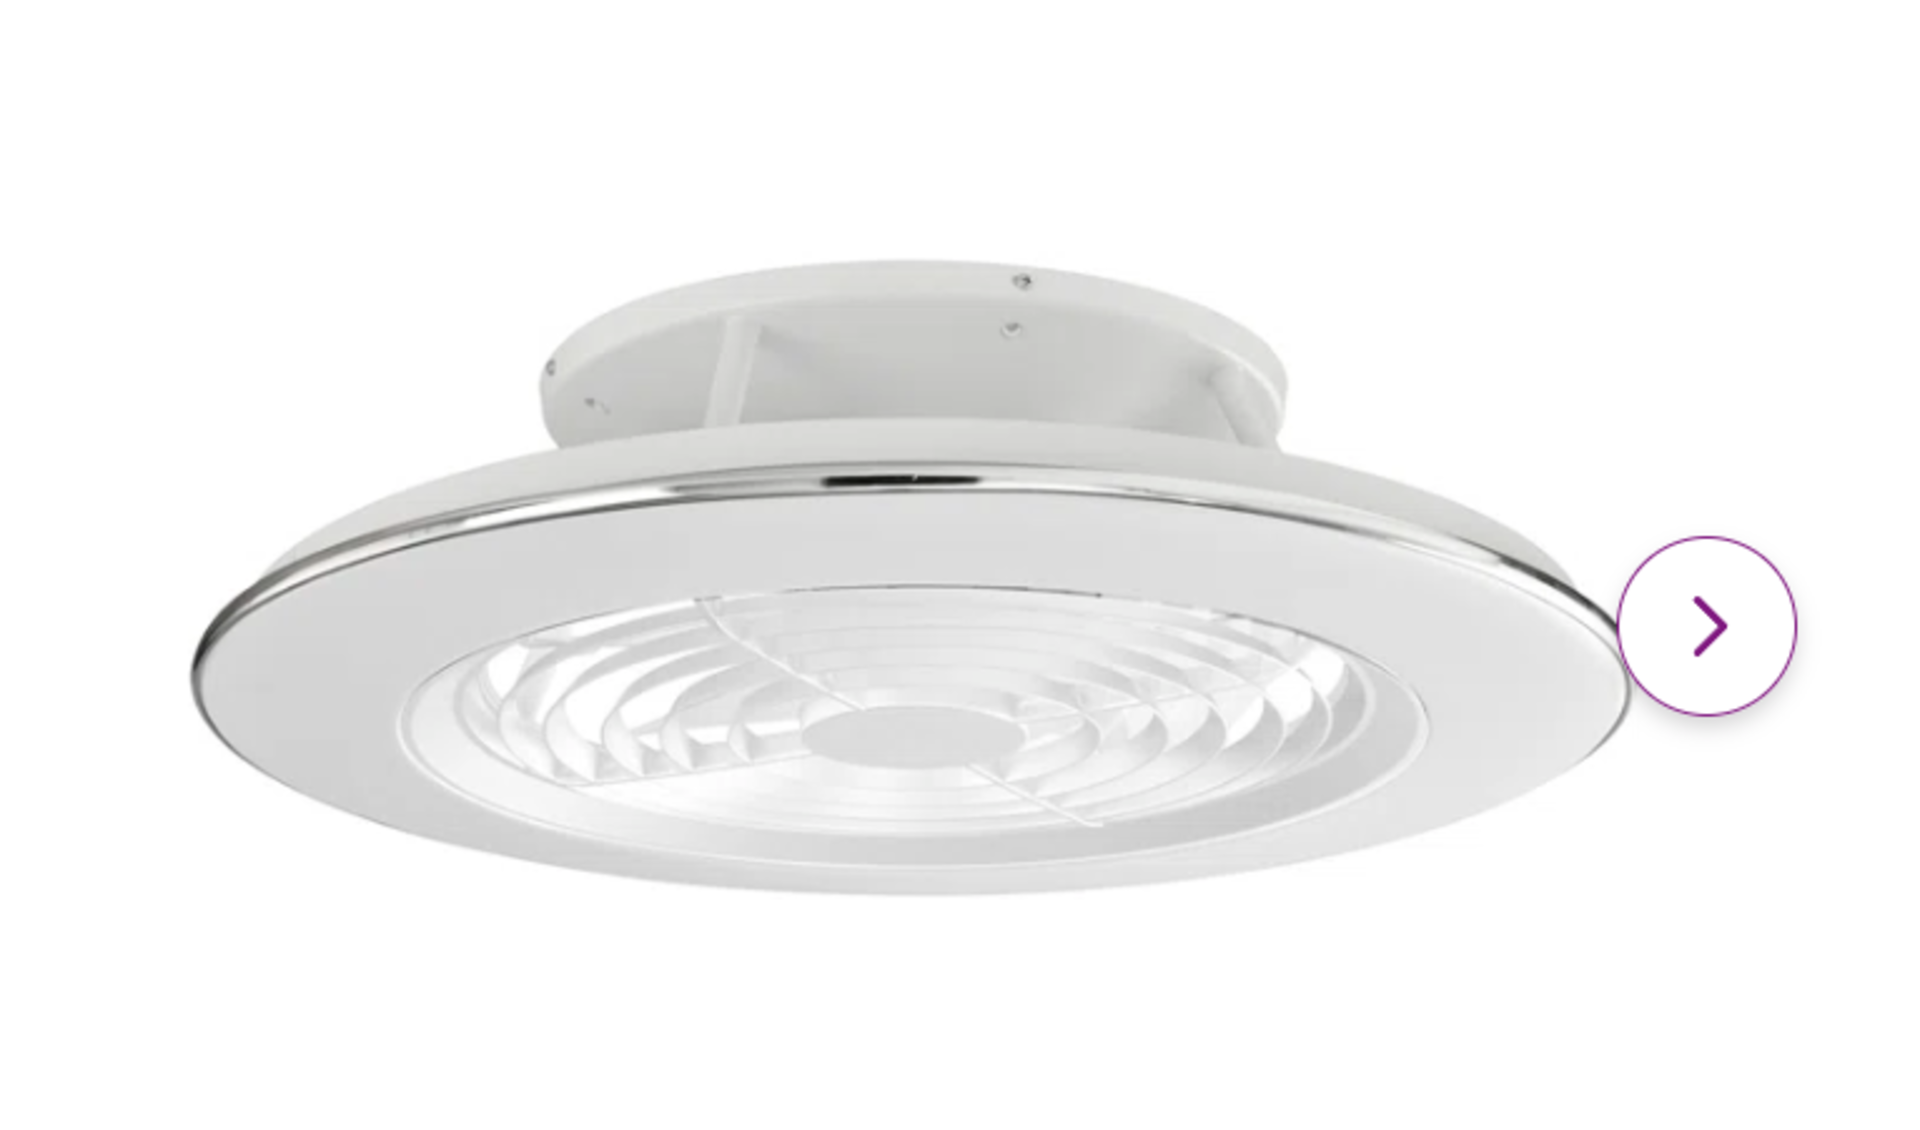 Thea Ceiling Fan with LED Lights. RRP £399.99. - SR4. This ceiling fan breaks into the sector of